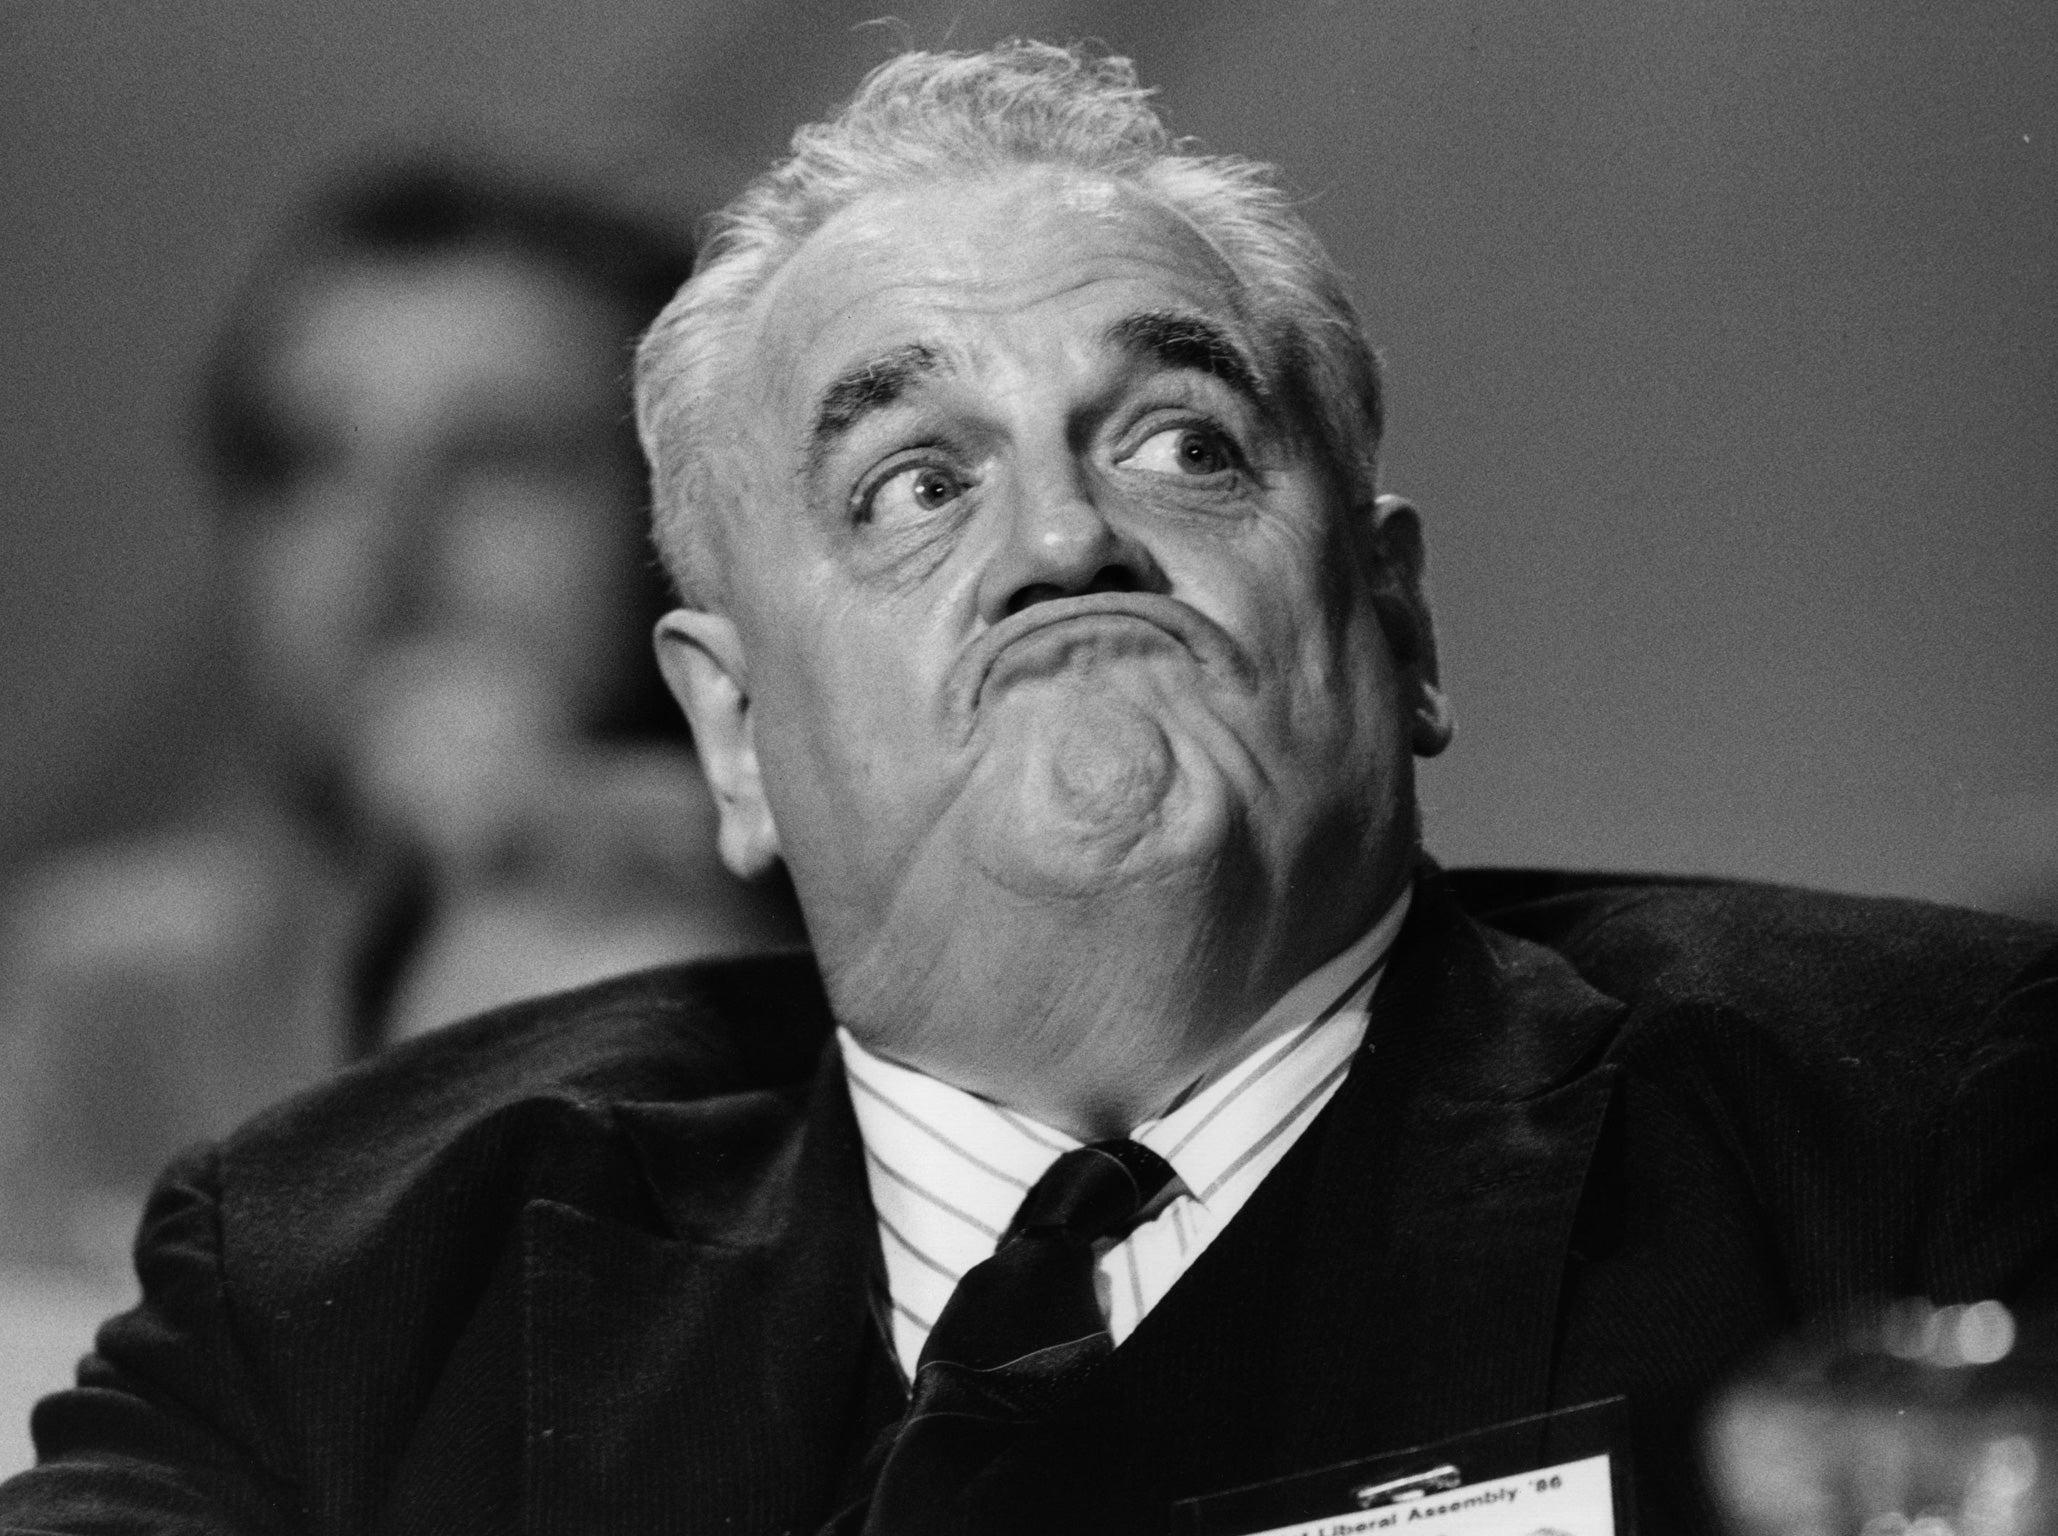 At the time of the allegations, Sir Cyril Smith was being considered for a government post